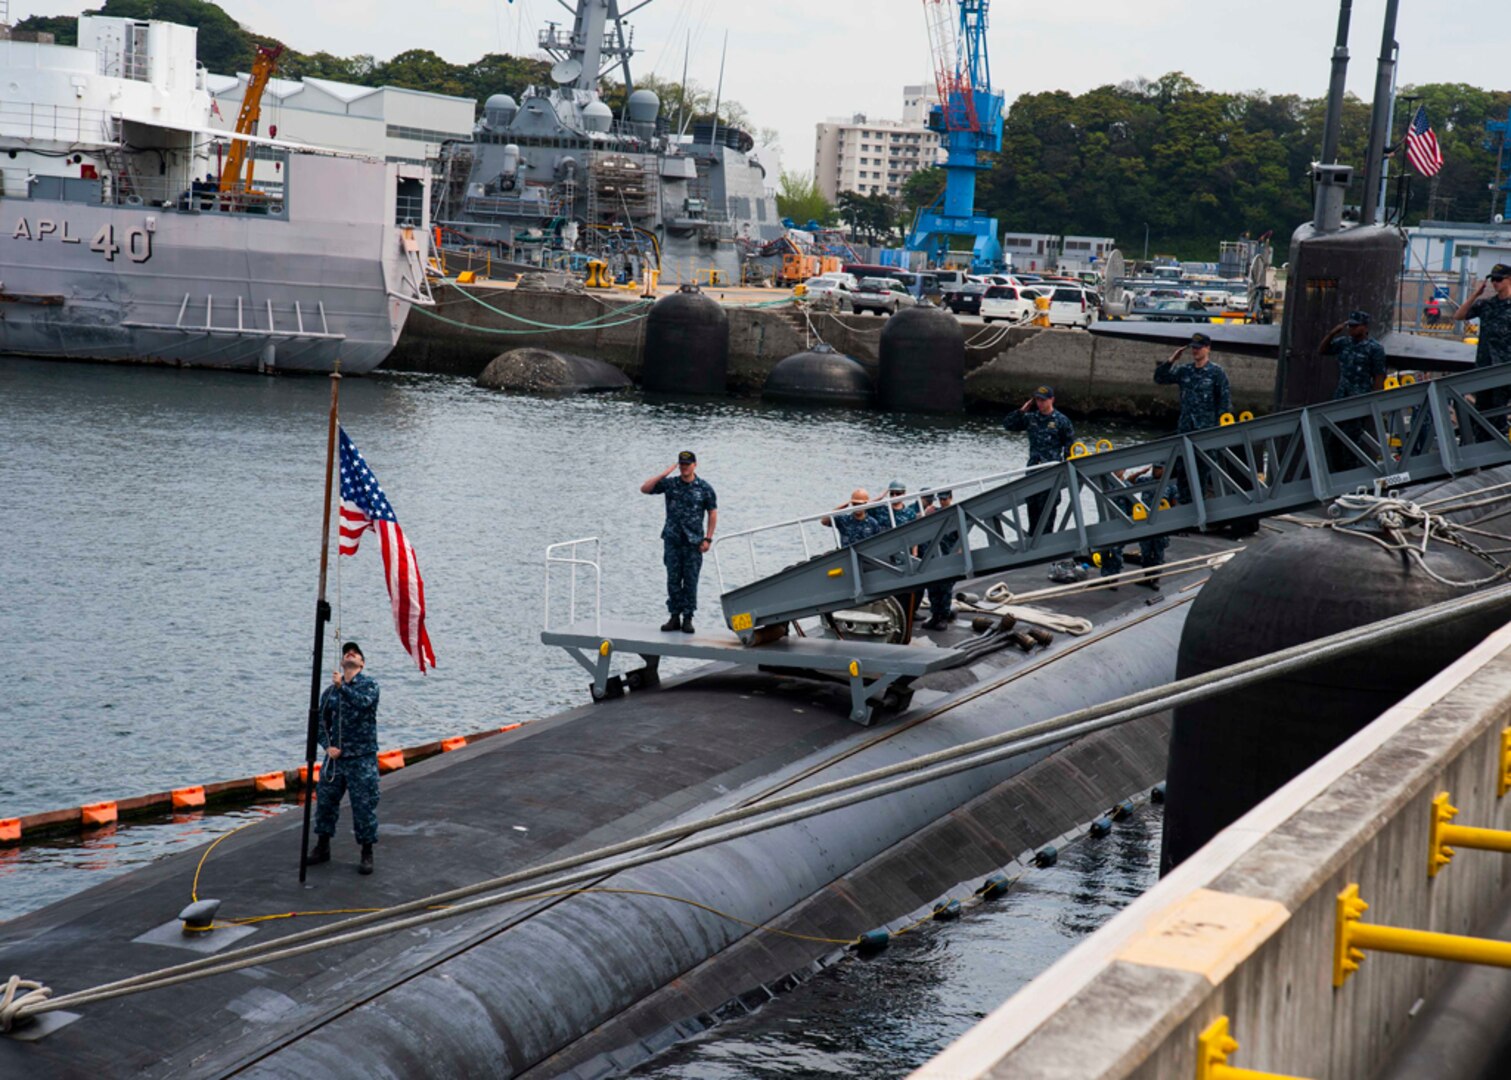 FLEET ACTIVITIES YOKOSUKA, Japan (April 22, 2015) The American flag is raised aboard the Los Angeles-class attack submarine USS Oklahoma City (SSN 723) as crewmembers render honors. Oklahoma City is moored at Fleet Activities Yokosuka during a scheduled port visit as part of its deployment to the western Pacific. 